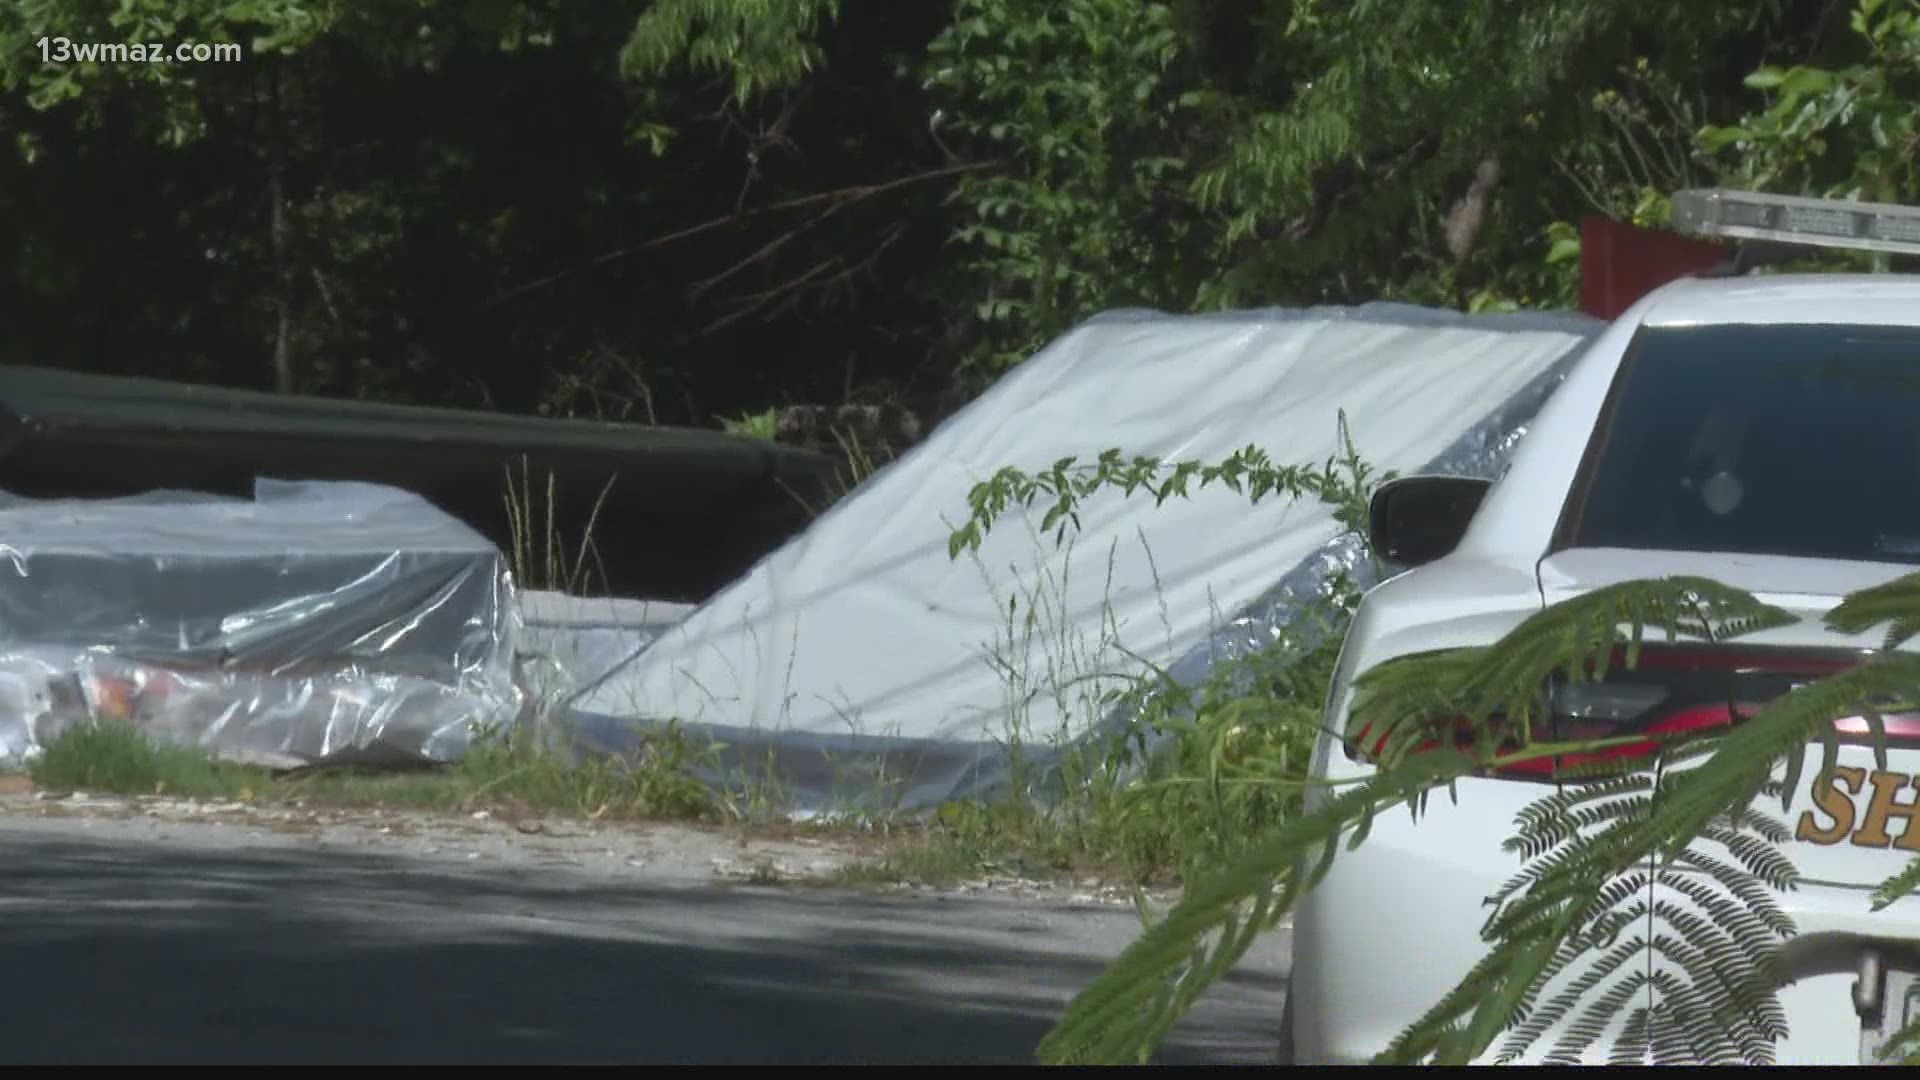 A man walking on his normal route in the neighborhood saw an arm sticking out from under a mattress and called 911